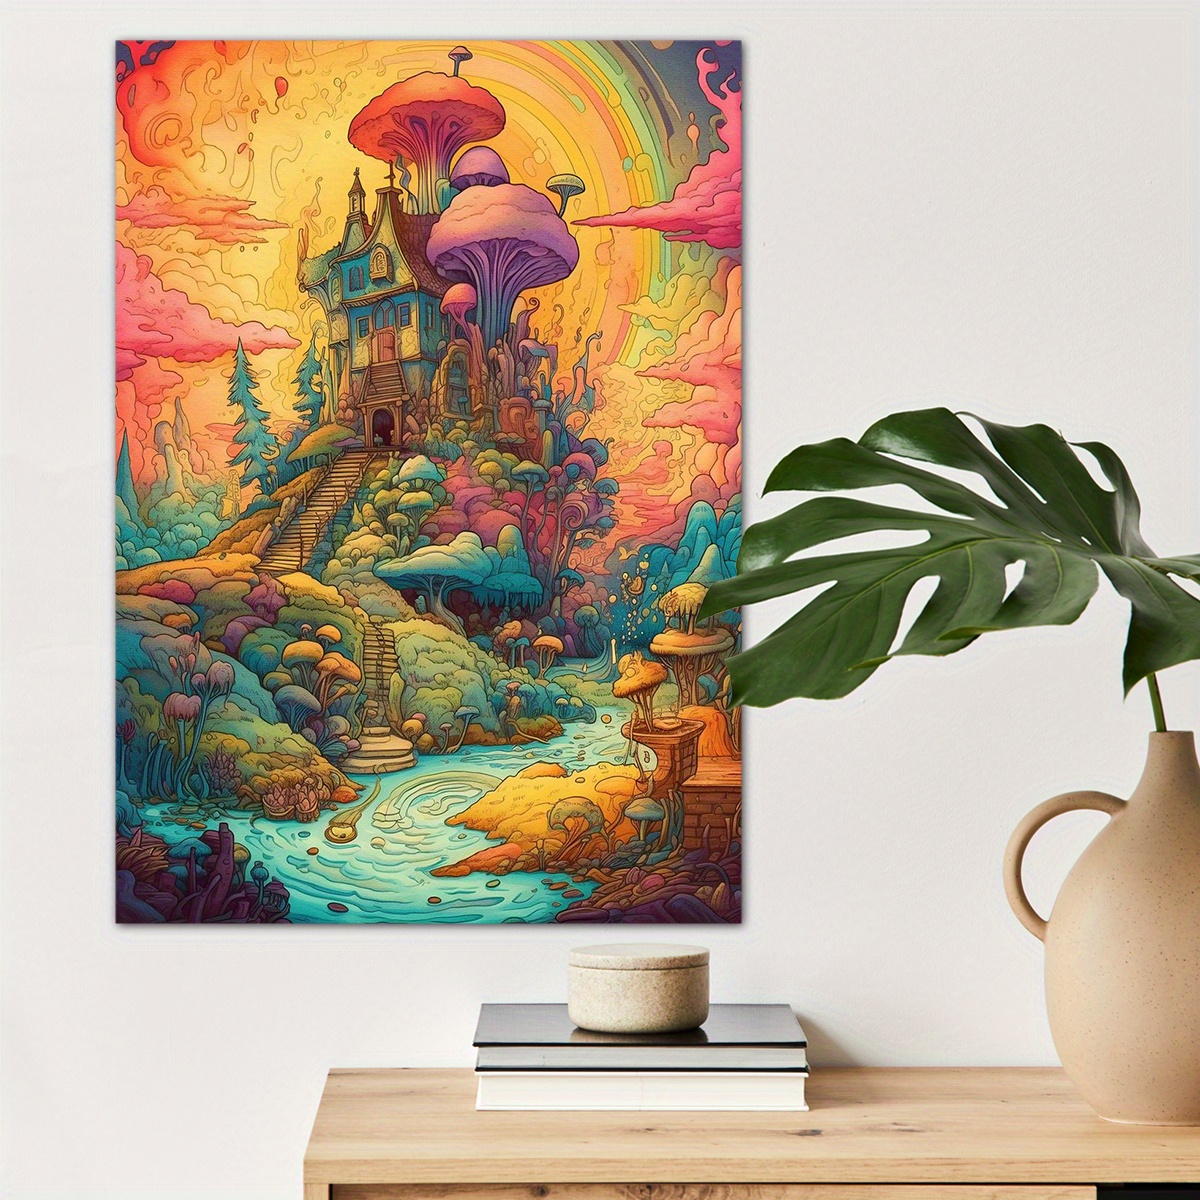 

1pc Colorful Abstract Mushroom Canvas Wall Art For Home Decor, High Quality Wall Decor, Canvas Prints For Living Room Bedroom Bathroom Kitchen Office Cafe Decor, Perfect Gift And Decoration